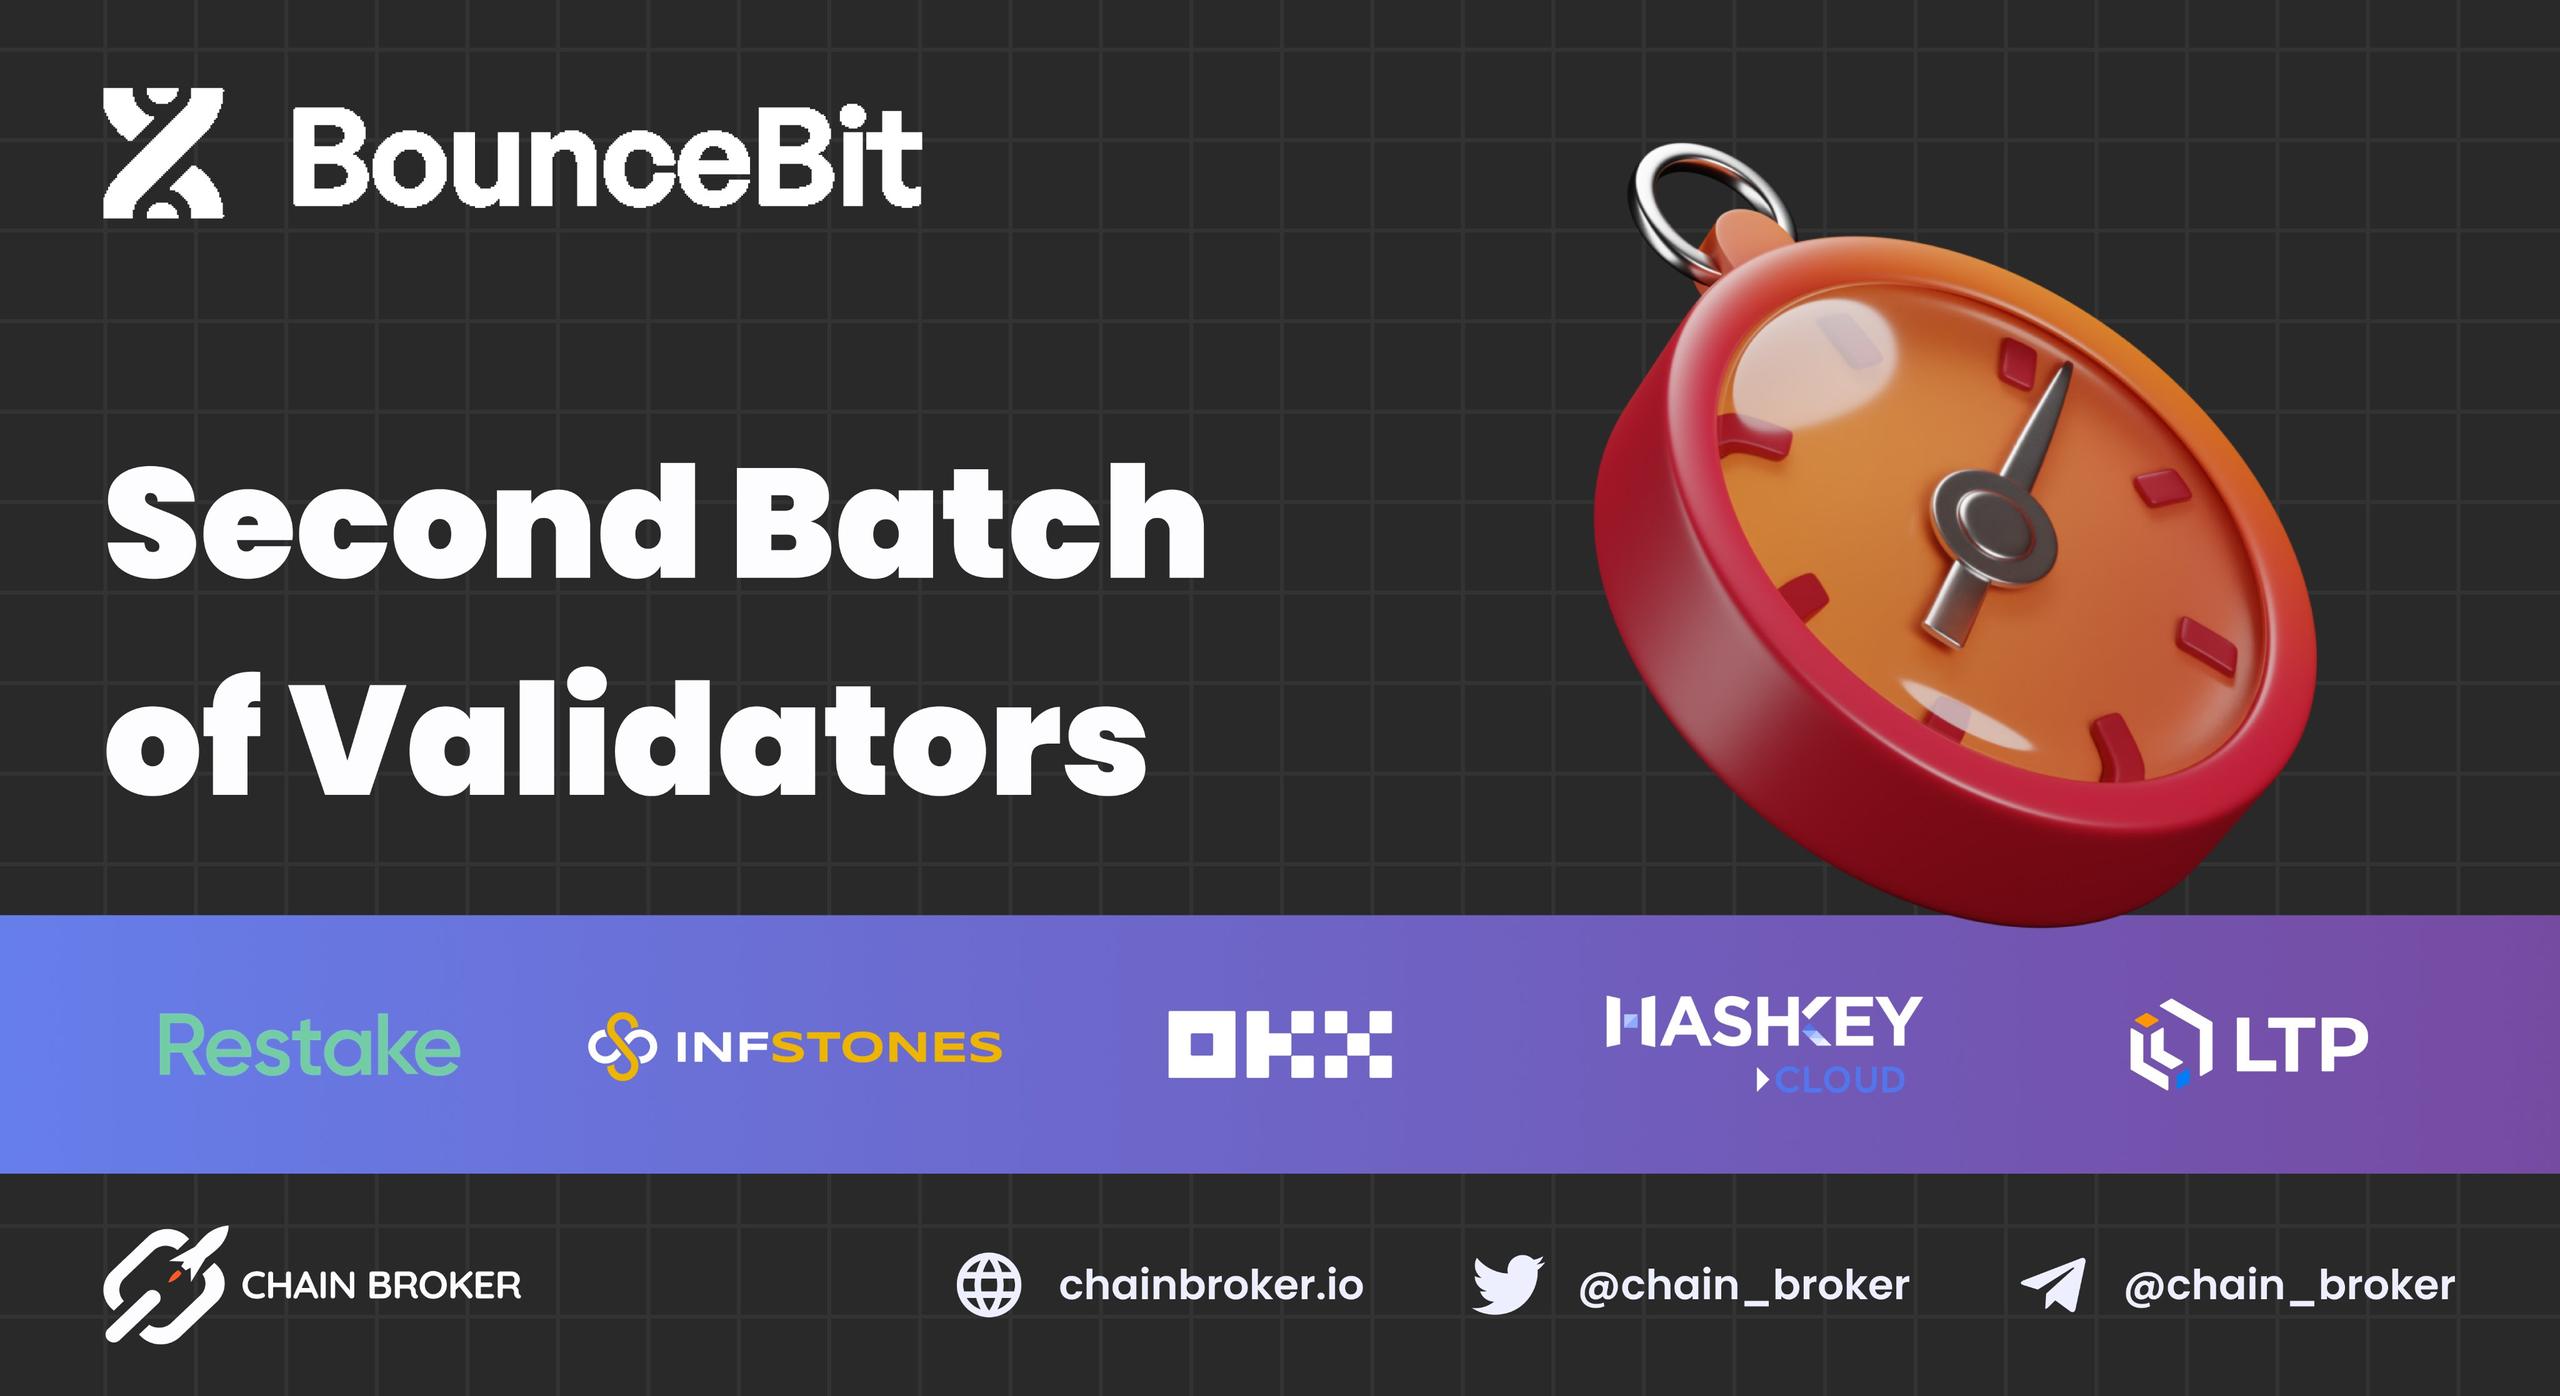 BounceBit has successfully onboarded the Second Batch of Validators